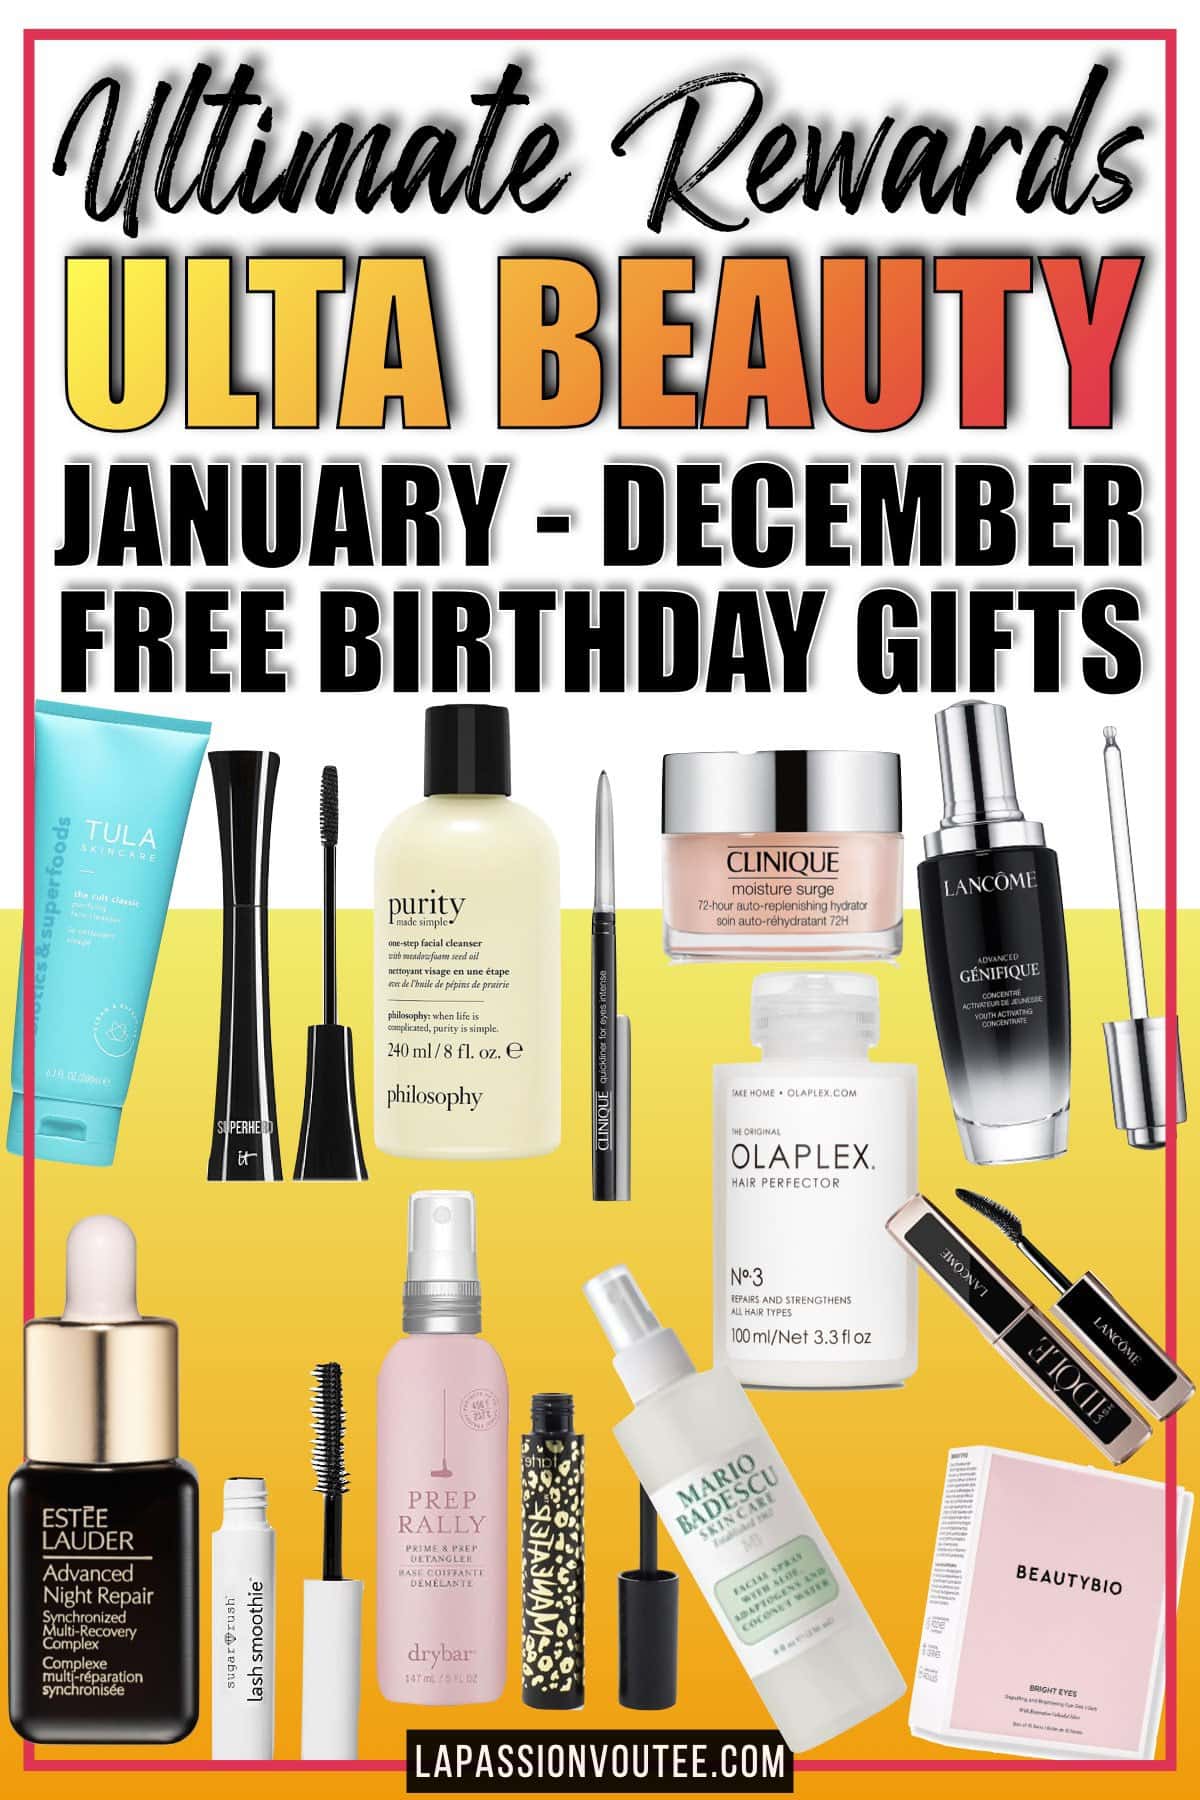 Want to score the best of the 2022 Ulta birthday gift? Read this post FIRST. Discover everything you need to know to claim your freebie online or in-store. Ultamate Rewards Birthday Gift 2022 options. #ulta #ultabeauty #beautyproduct ulta beauty coupon, ulta birthday gift 2022, ulta birthday gift february 2022, ulta birthday code, ulta birthday box, ulta beauty birthday gift